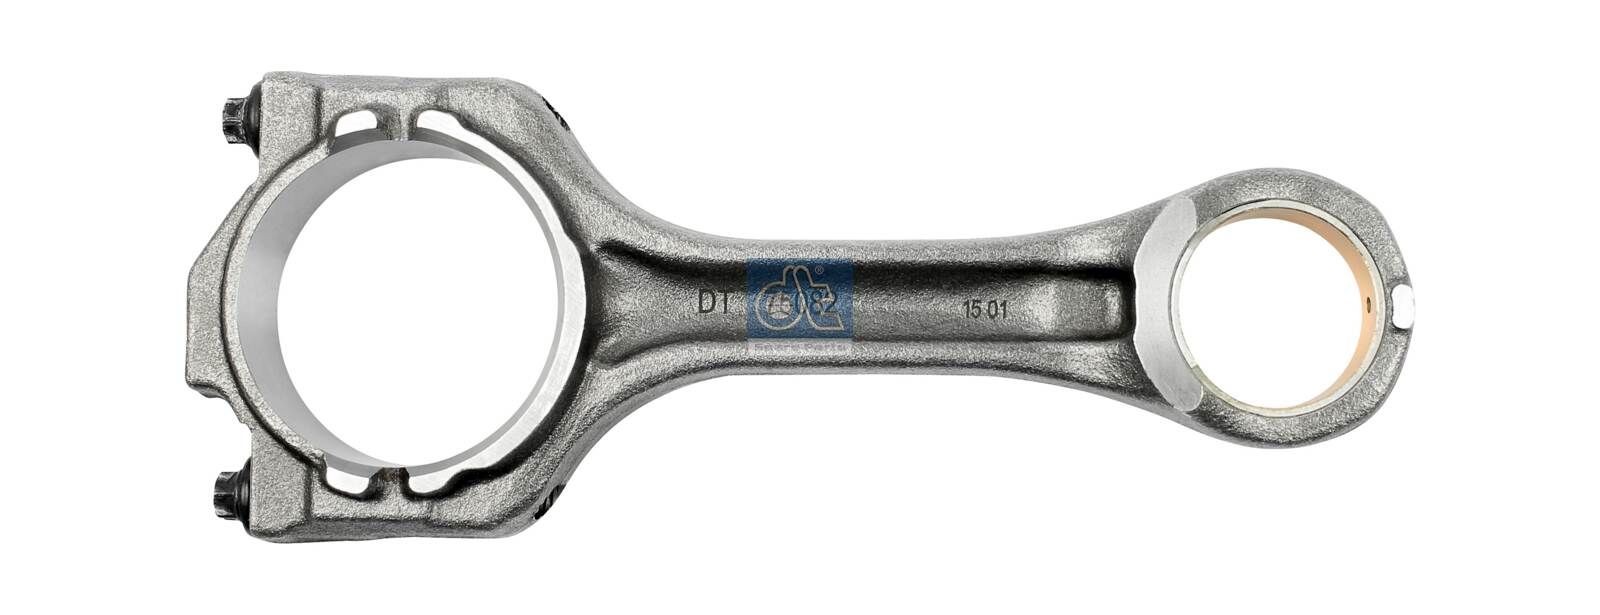 Original 3.11219 DT Spare Parts Connecting rod experience and price